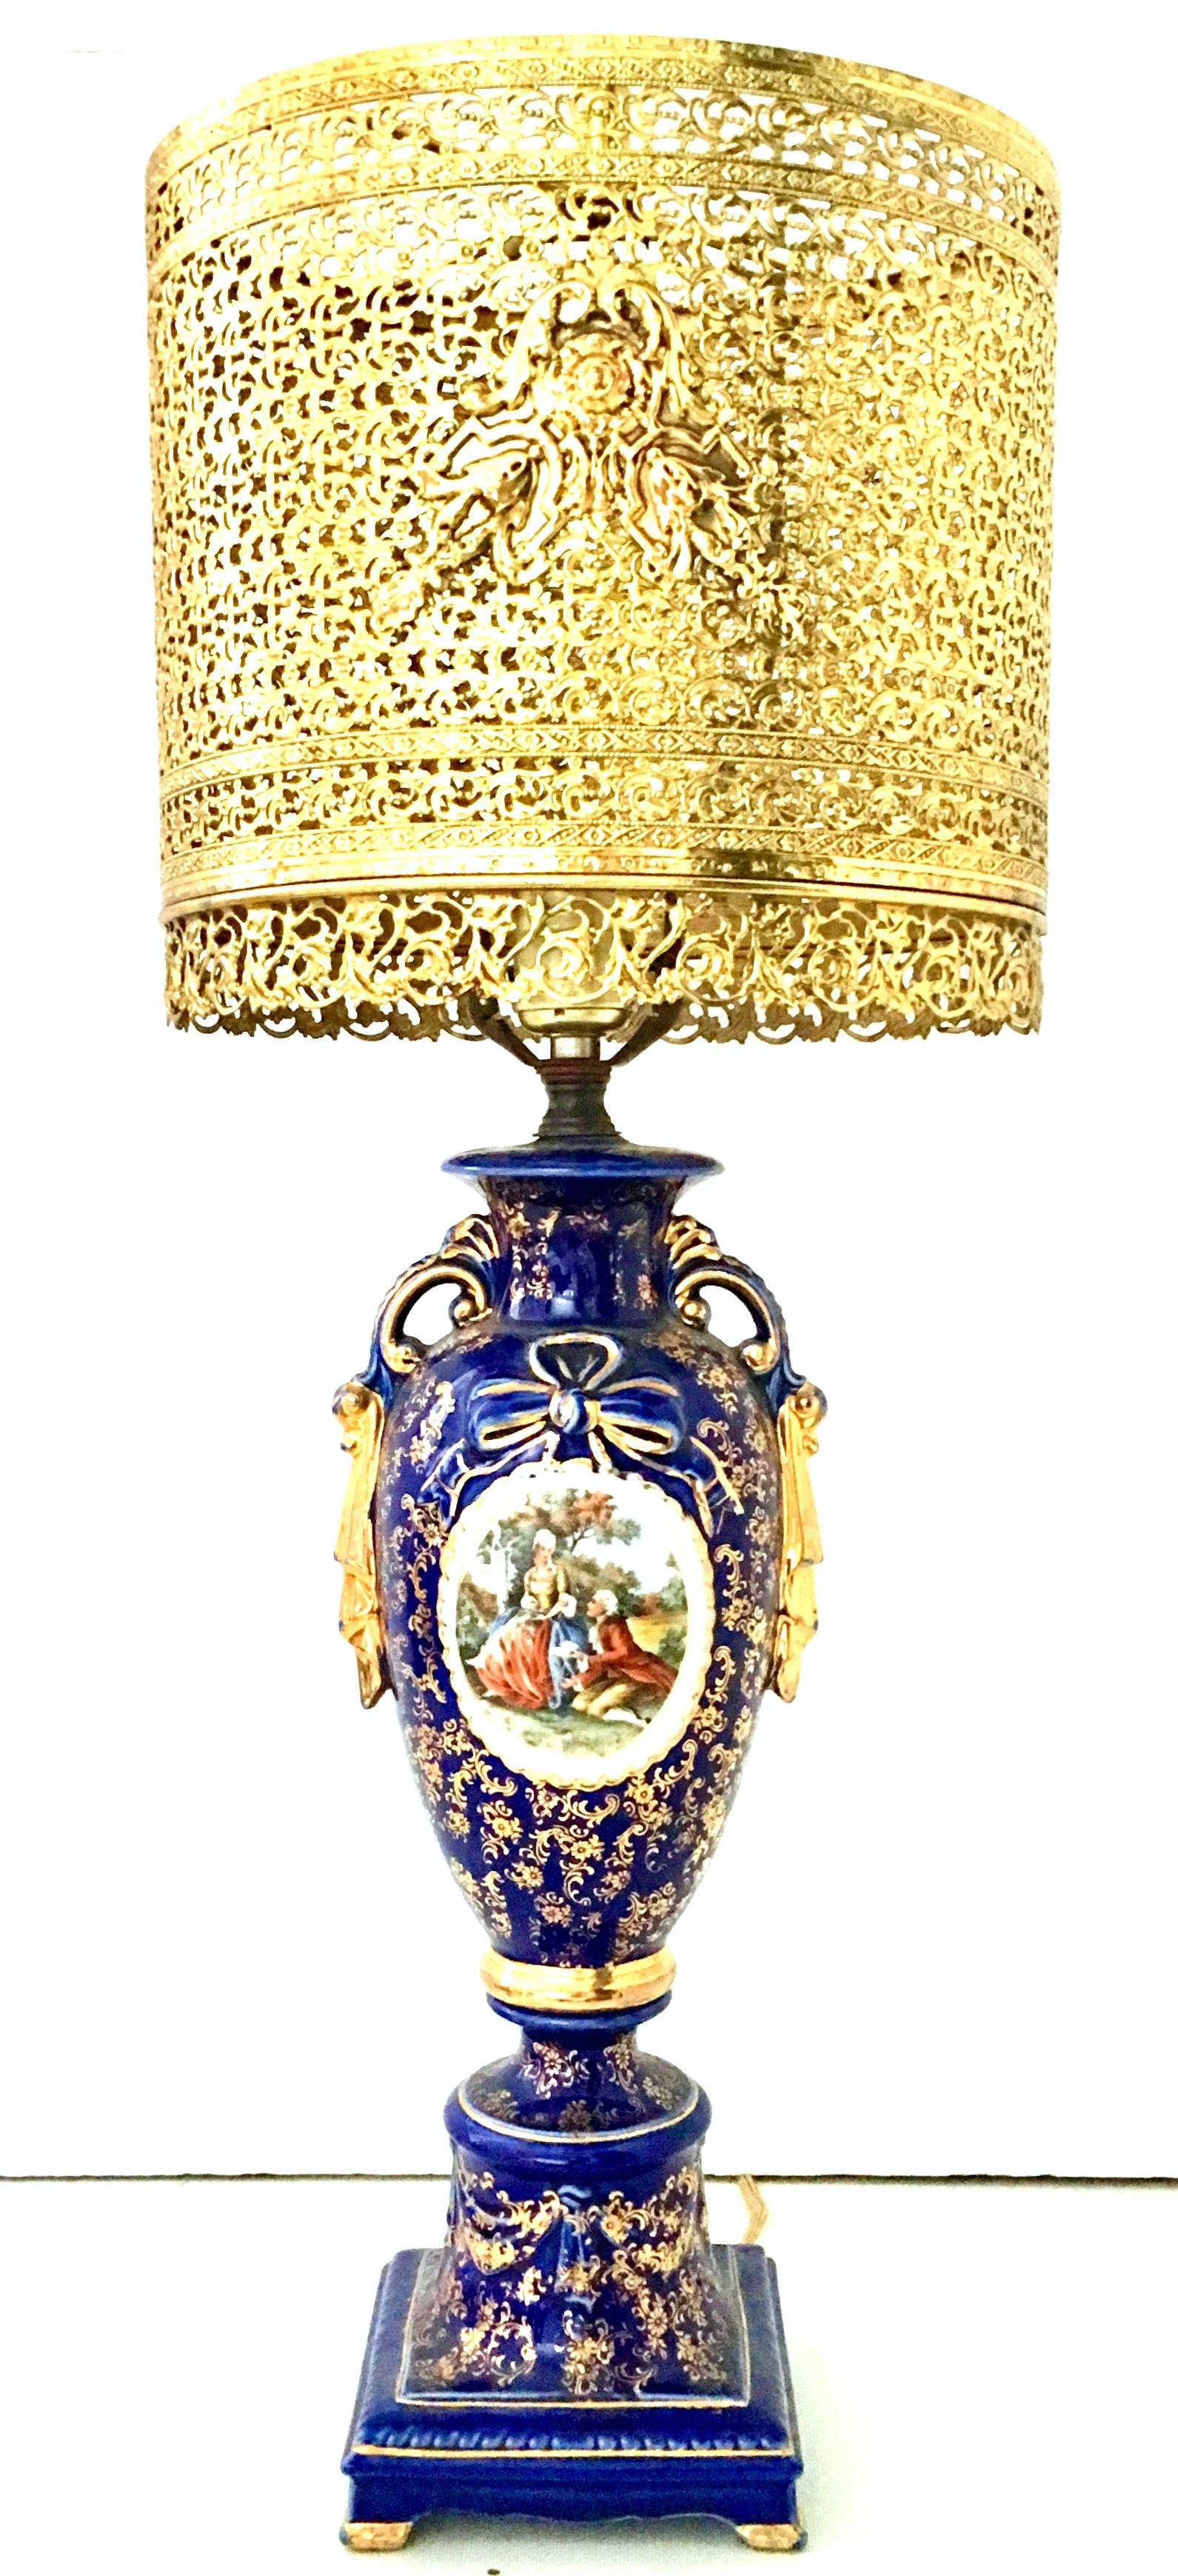 Antique European Sèvres style porcelain cobalt and 22K gilt gold hand-painted Courting couple portrait scene vase lamp. Paired with an Italian gold gilt brass pierced shade. This dramatic and opulent cobalt urn vase form table lamp has a floral and